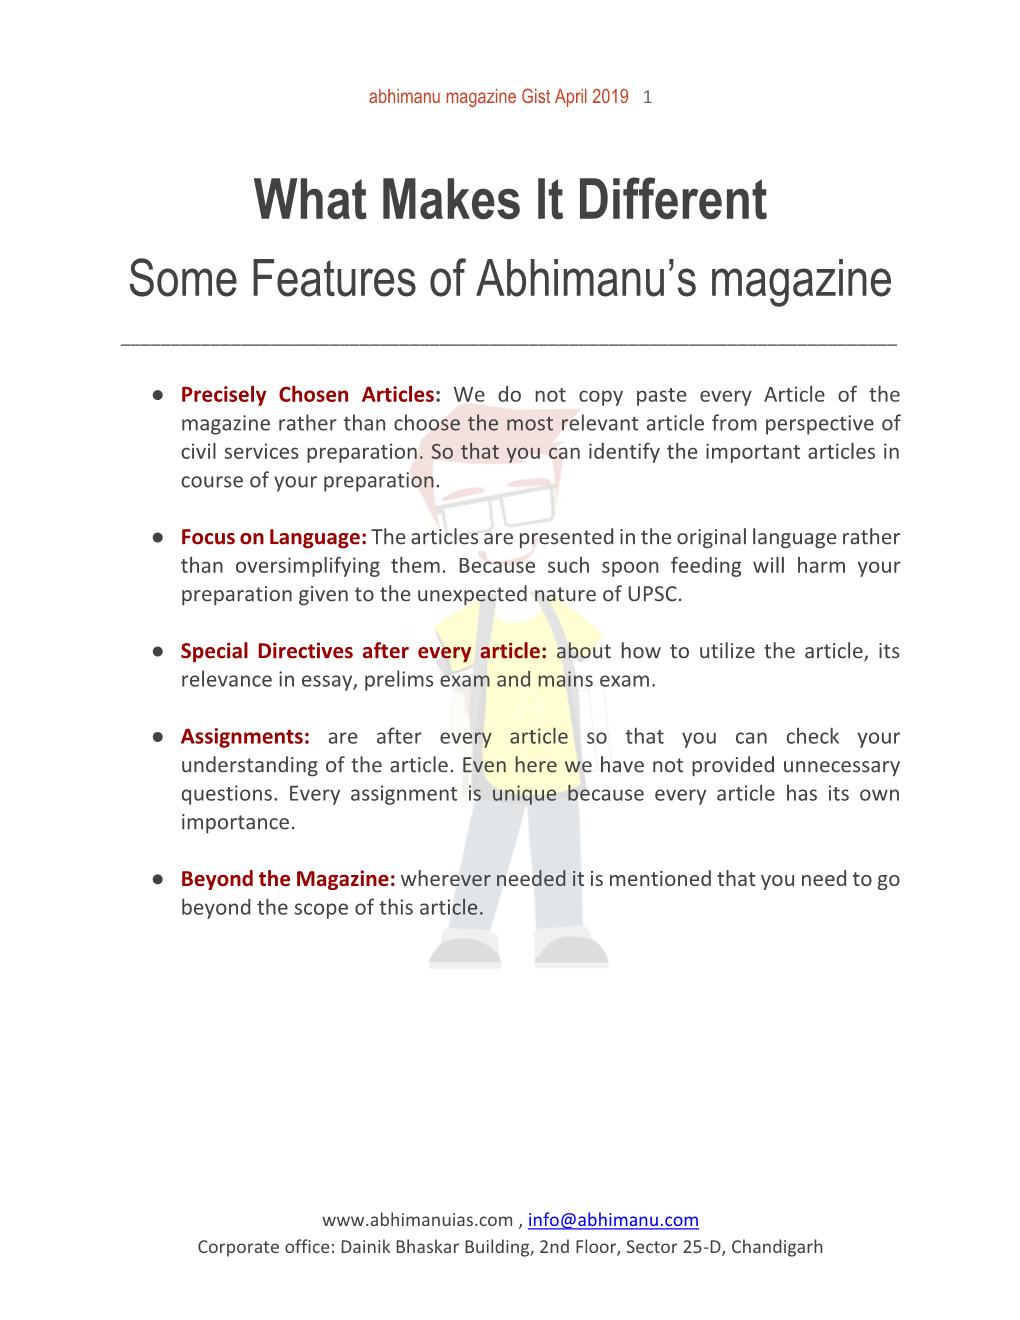 What Makes It Different Some Features of Abhimanu’S Magazine